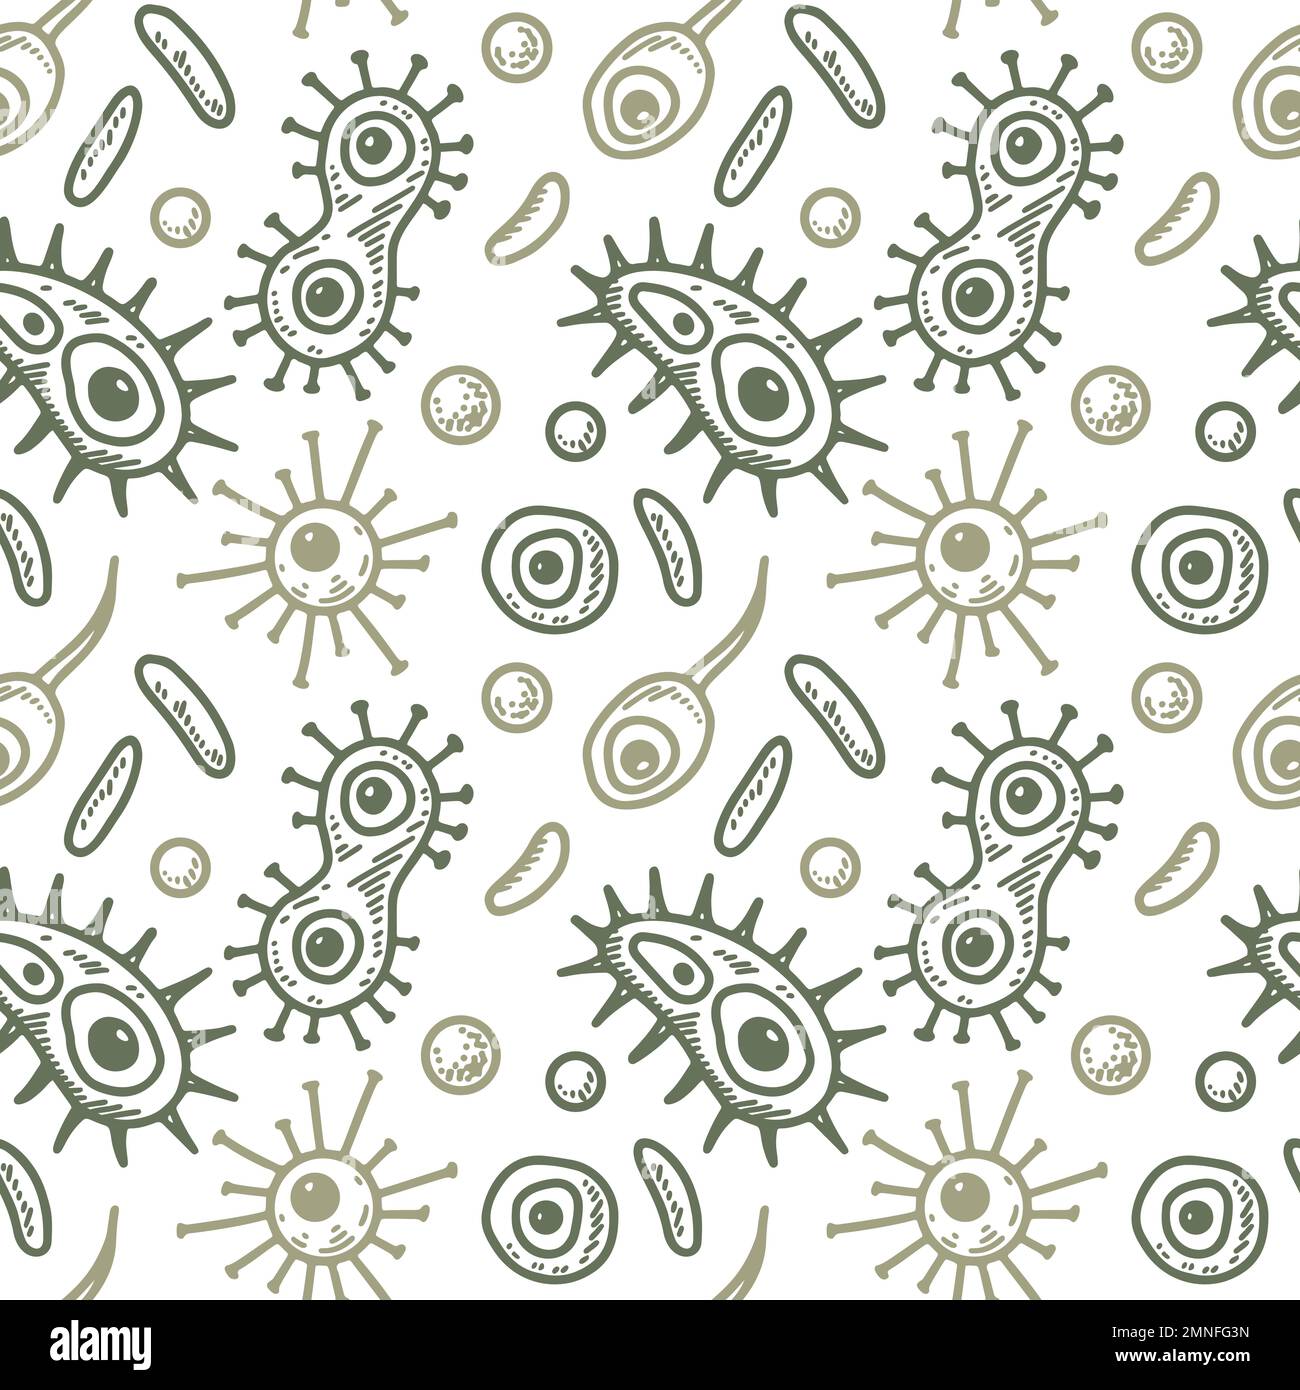 Unicellular microorganism seamless pattern. Scientific vector illustration in sketch style. Doodle background Stock Vector